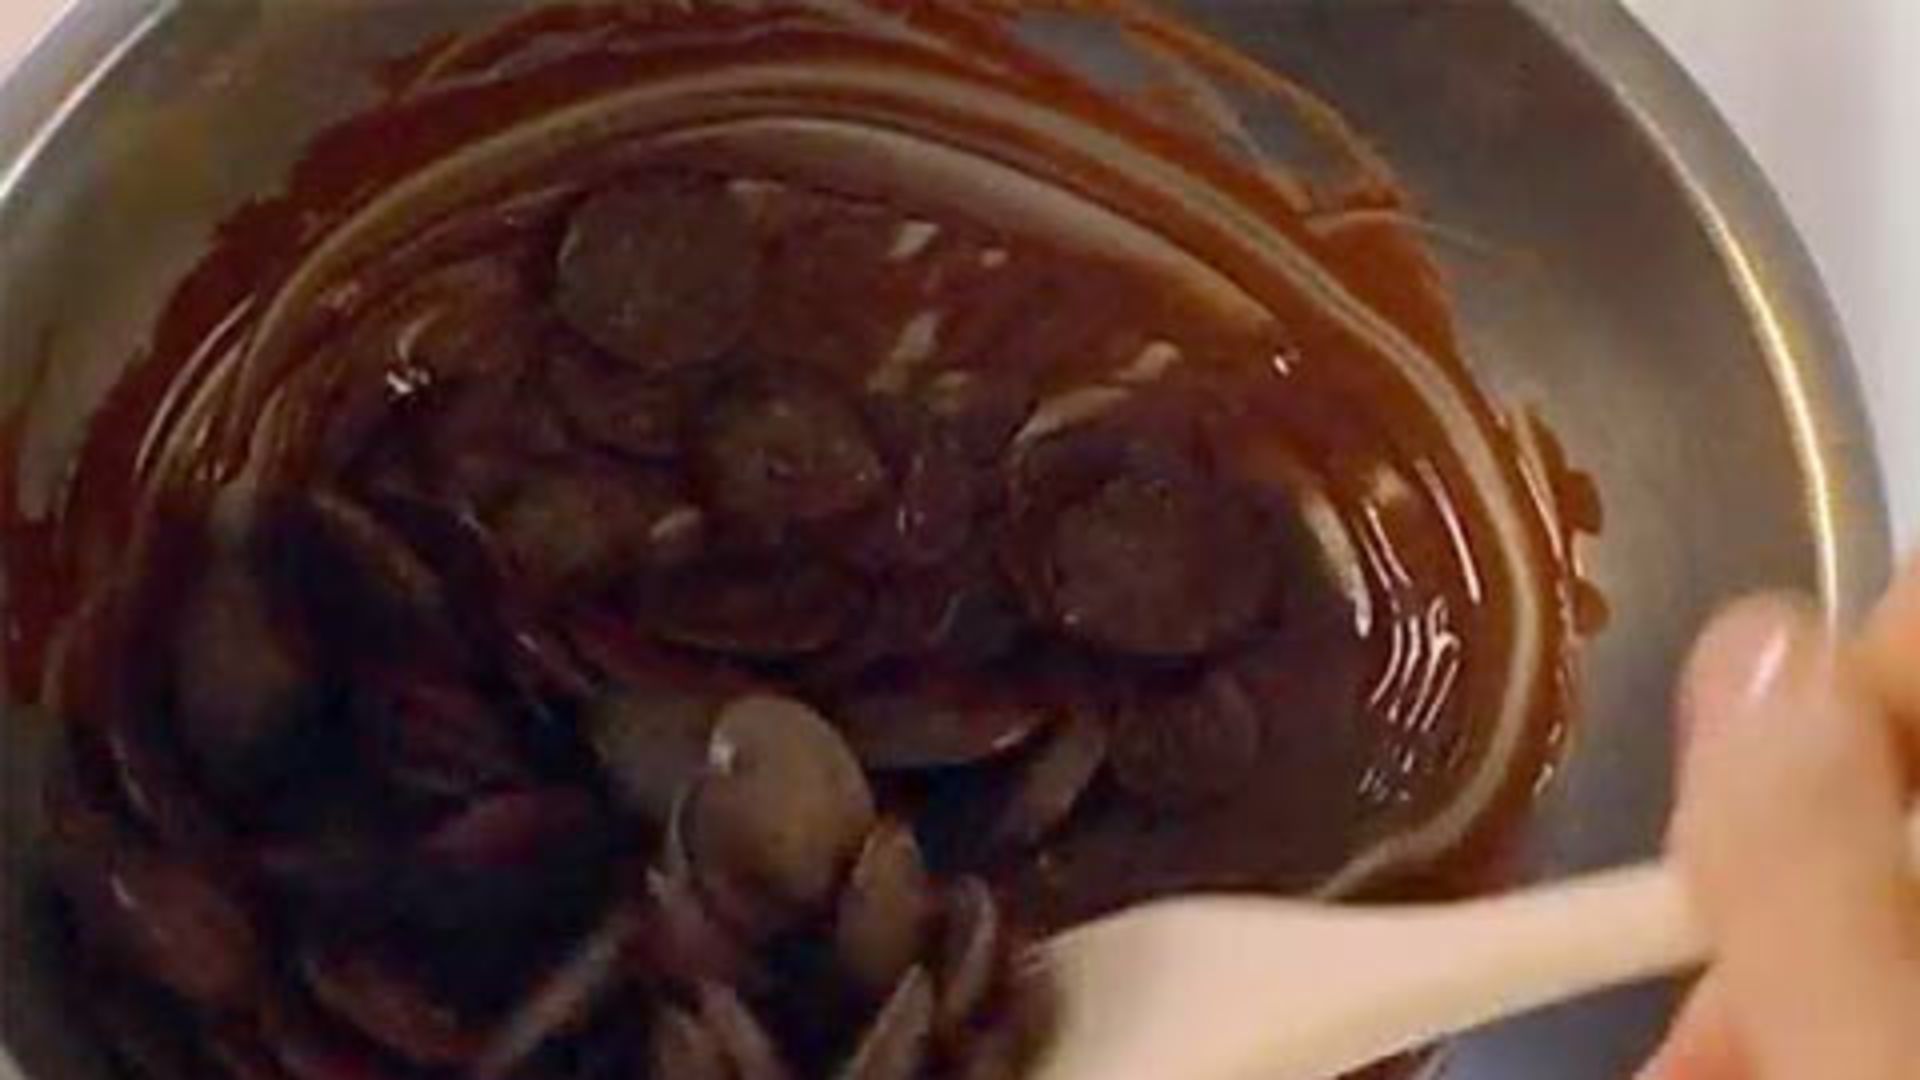 Watch How to Melt Chocolate, Epicurious Essentials: Cooking How-Tos